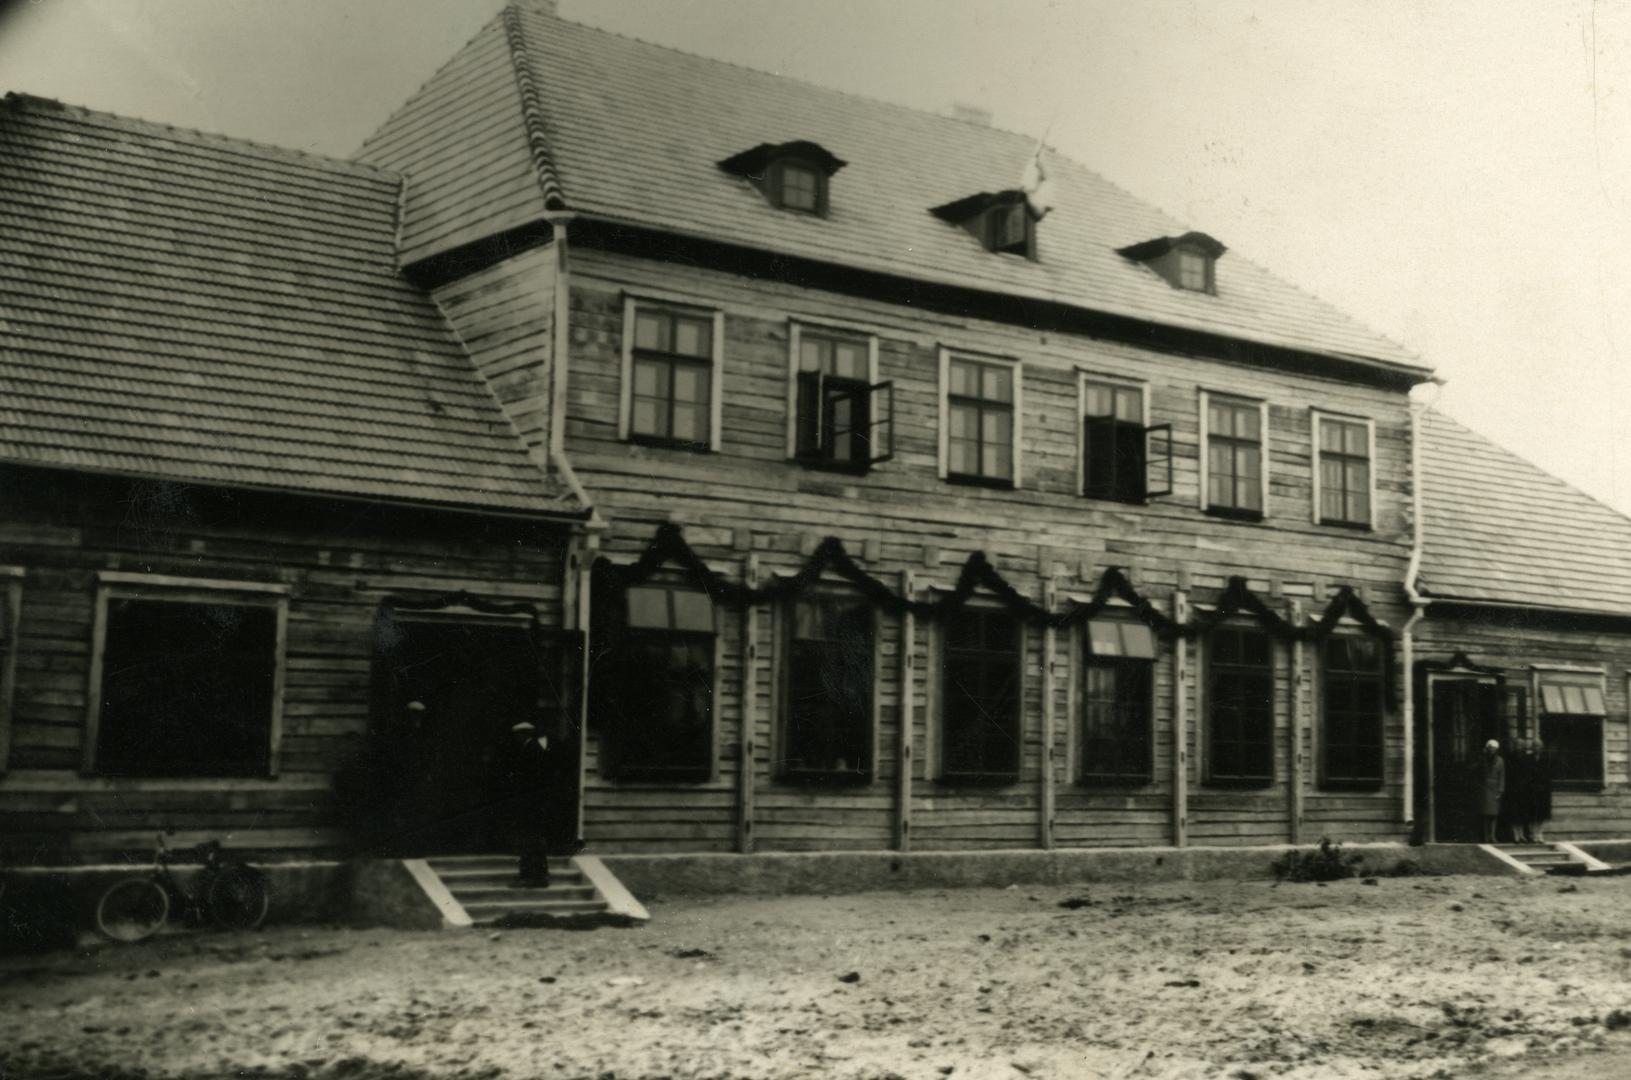 During construction and admission of the school building